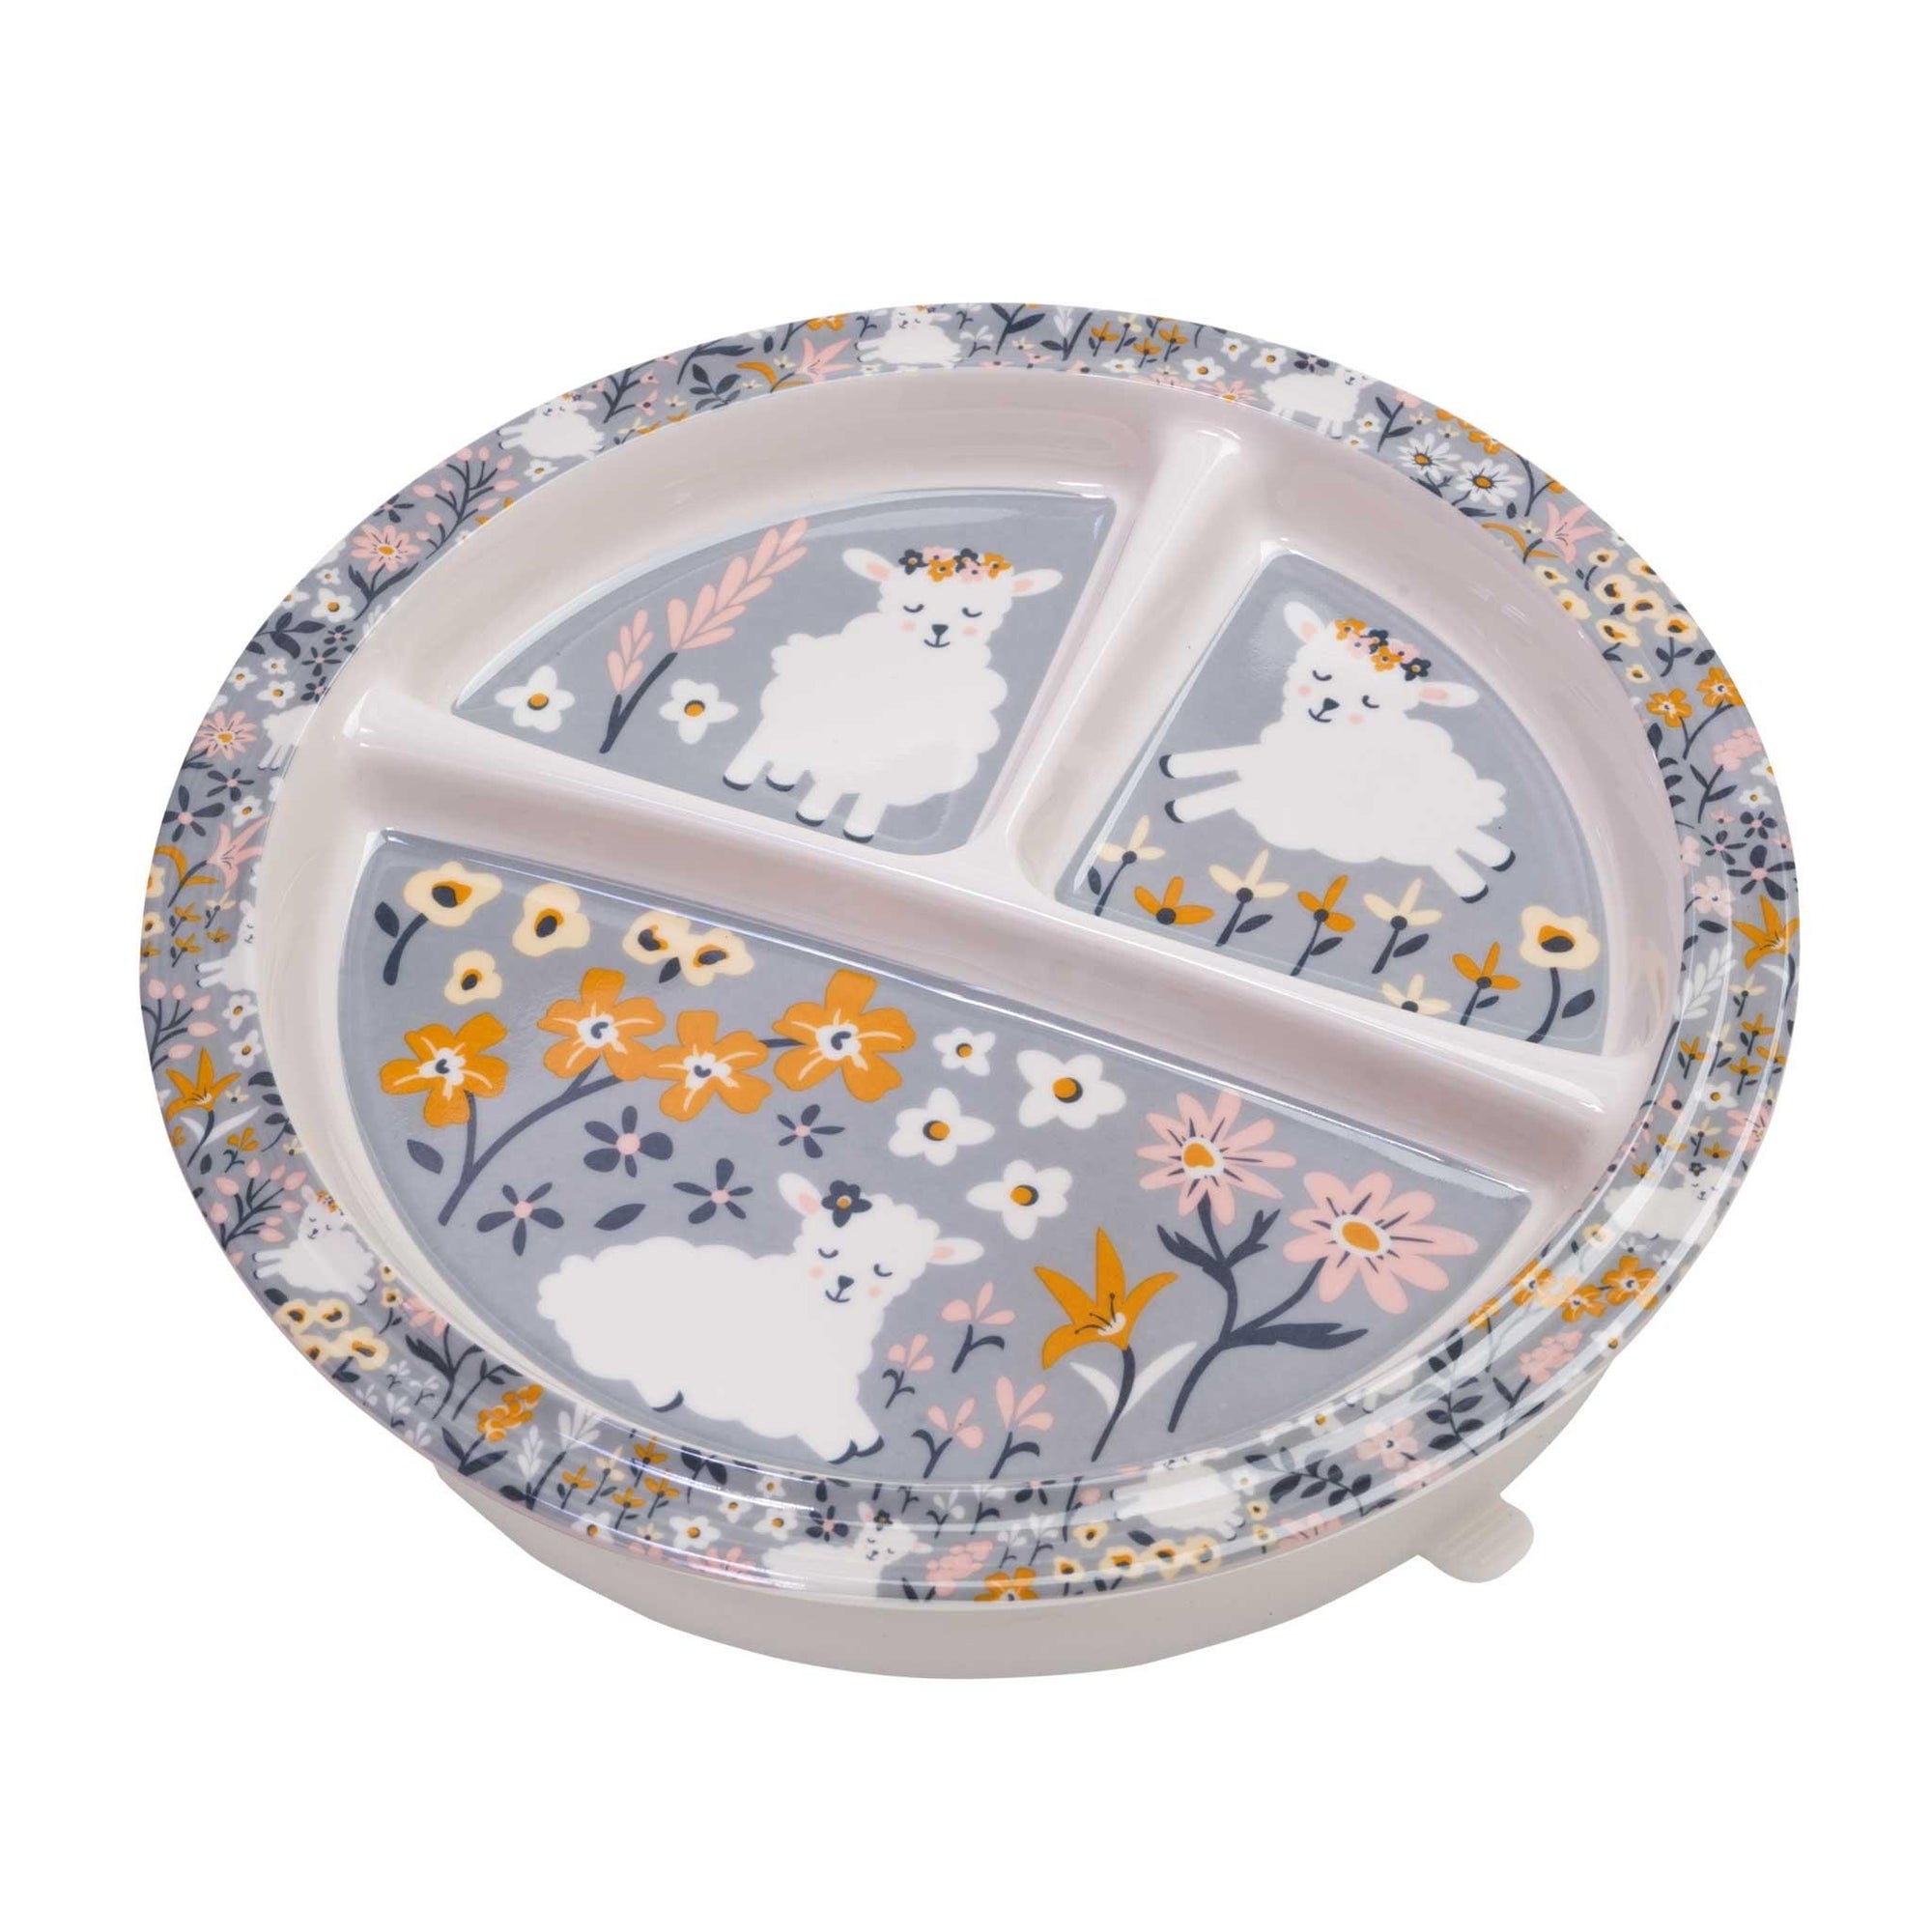 SugarBooger Divided Suction Plate - Lily The Lamb